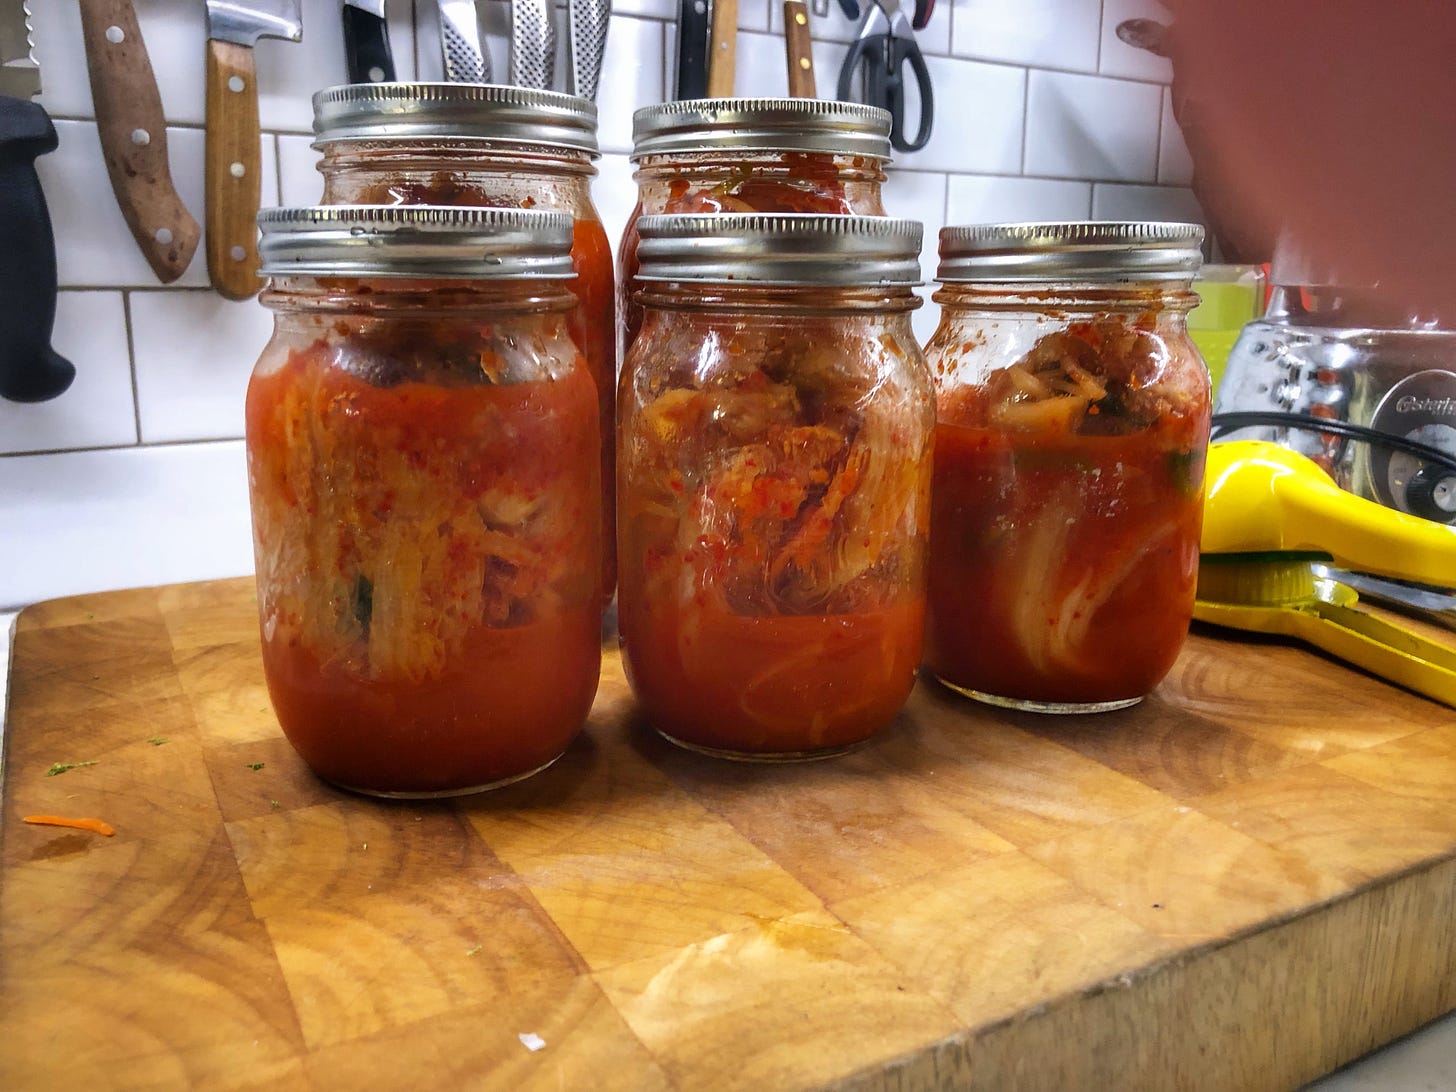 Five jars of kimchi on a cutting board. My fingertip is covering part of the camera lens.